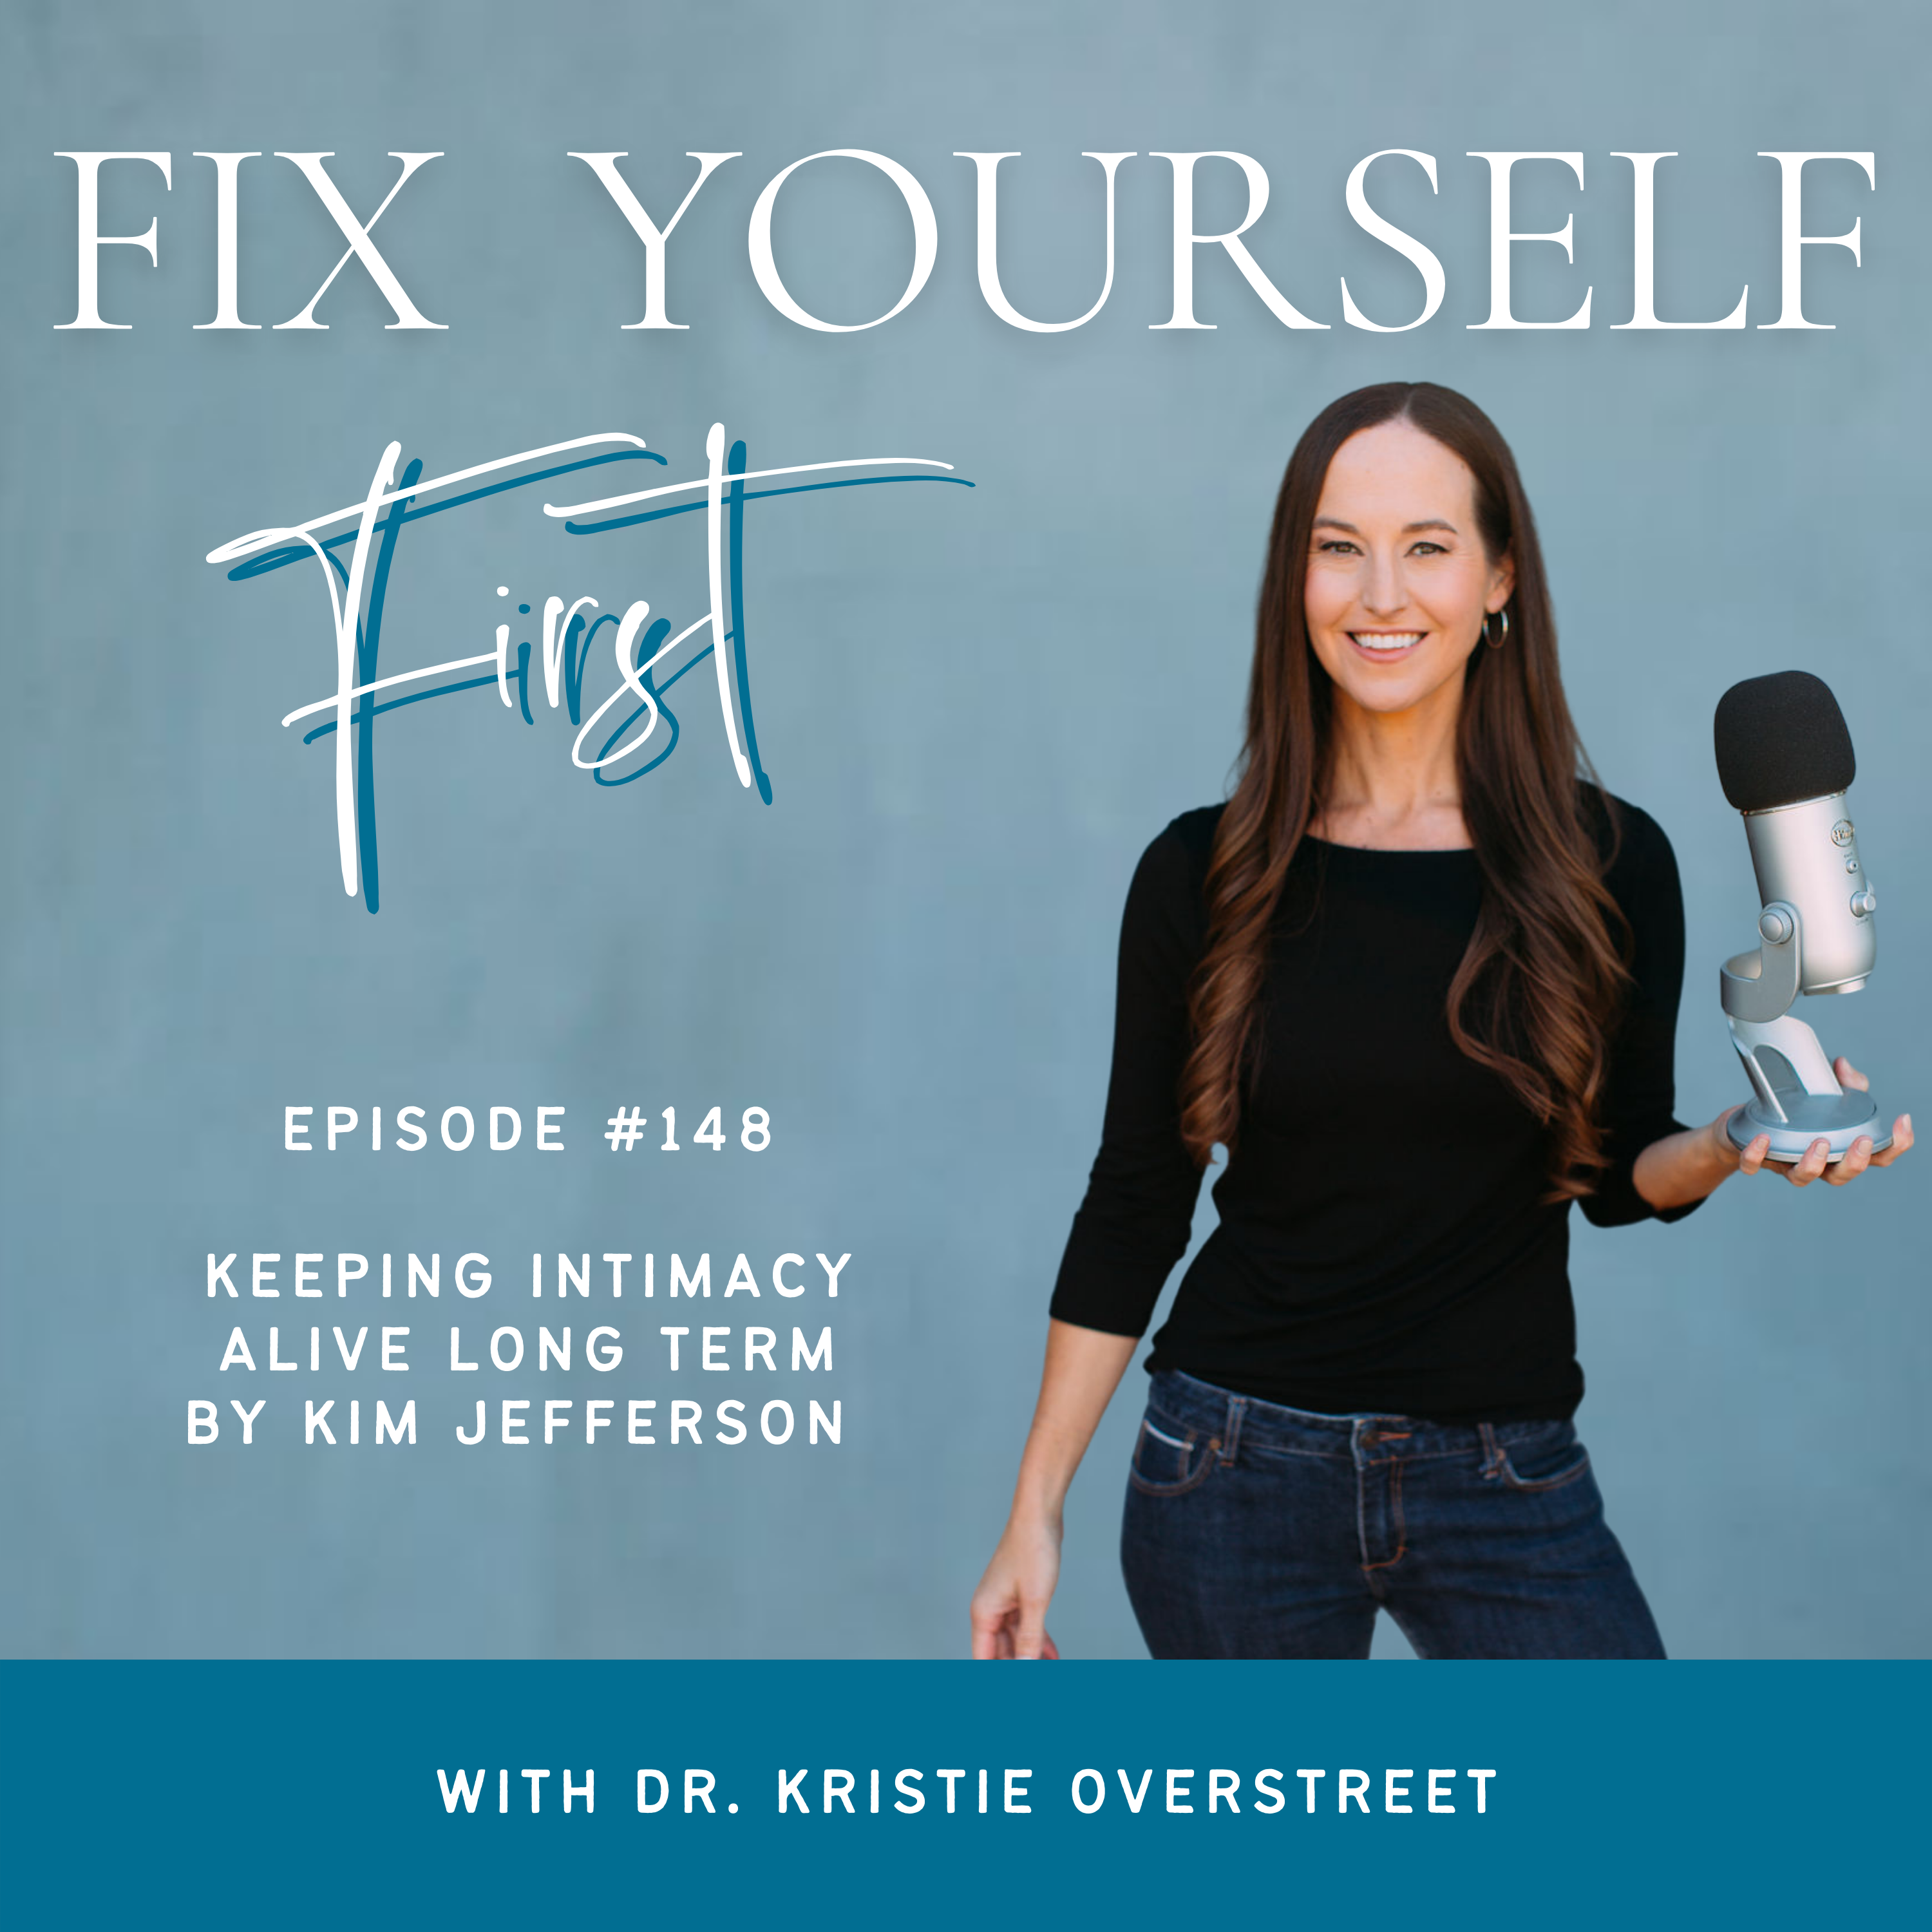 Fix Yourself First Episode 148 Keeping Intimacy Alive Long Term by Kim Jefferson